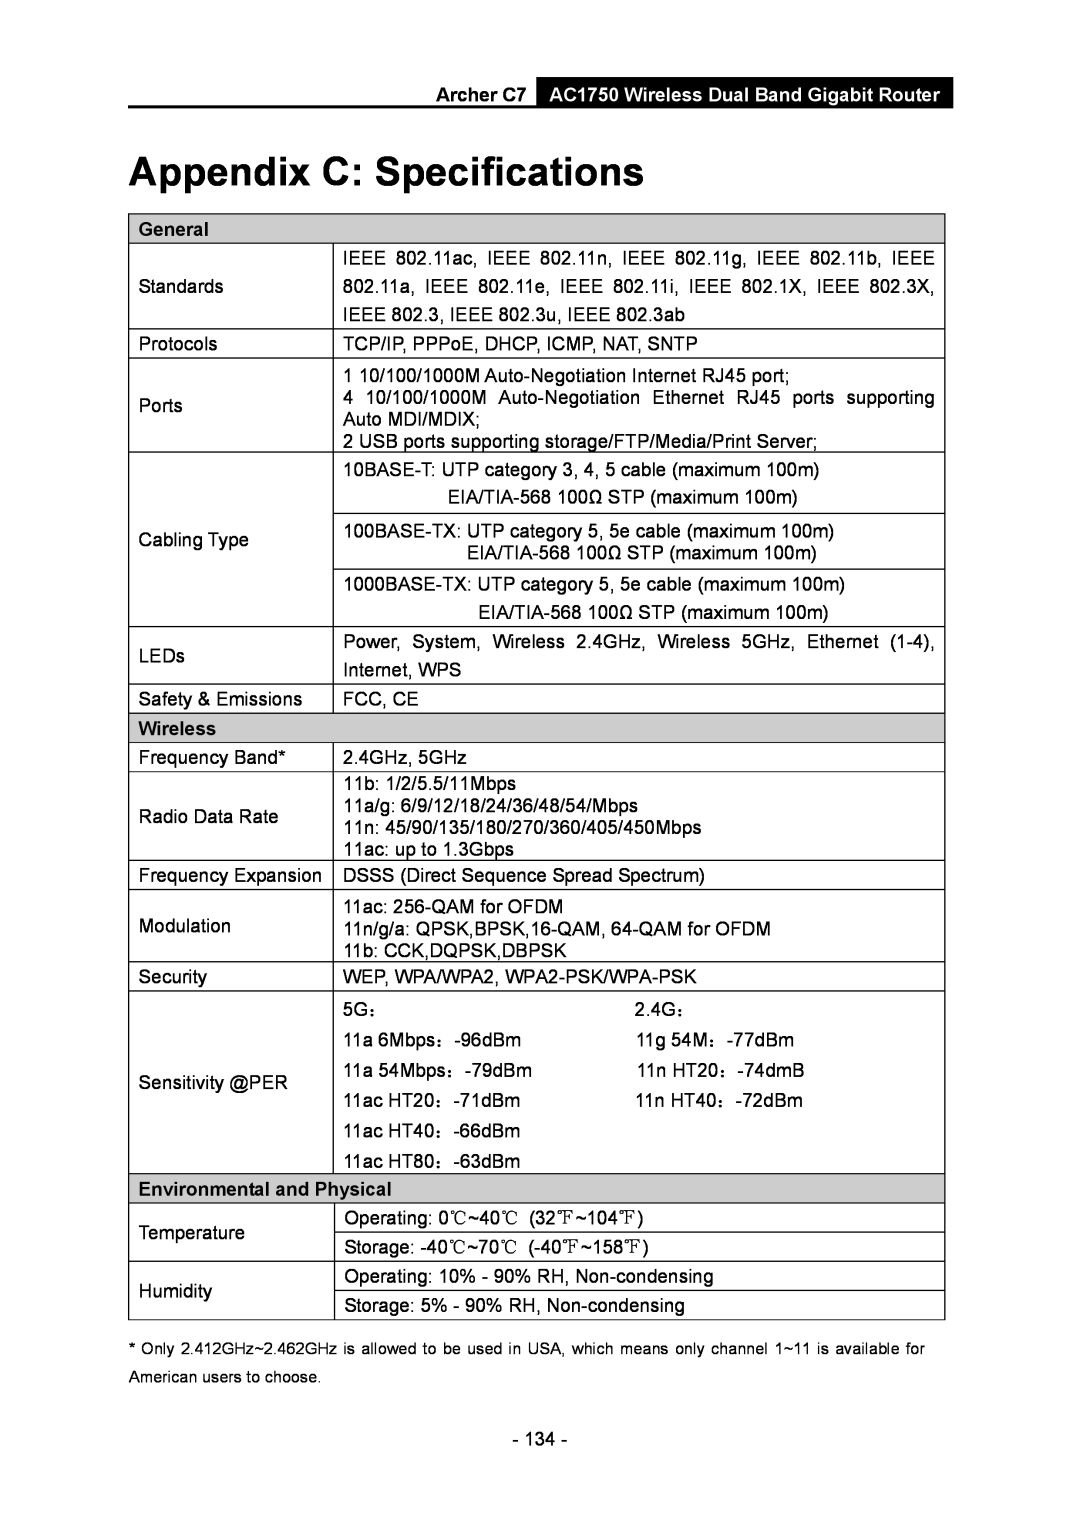 TP-Link AC1750 manual Appendix C Specifications, General, Wireless, Environmental and Physical, Archer C7 